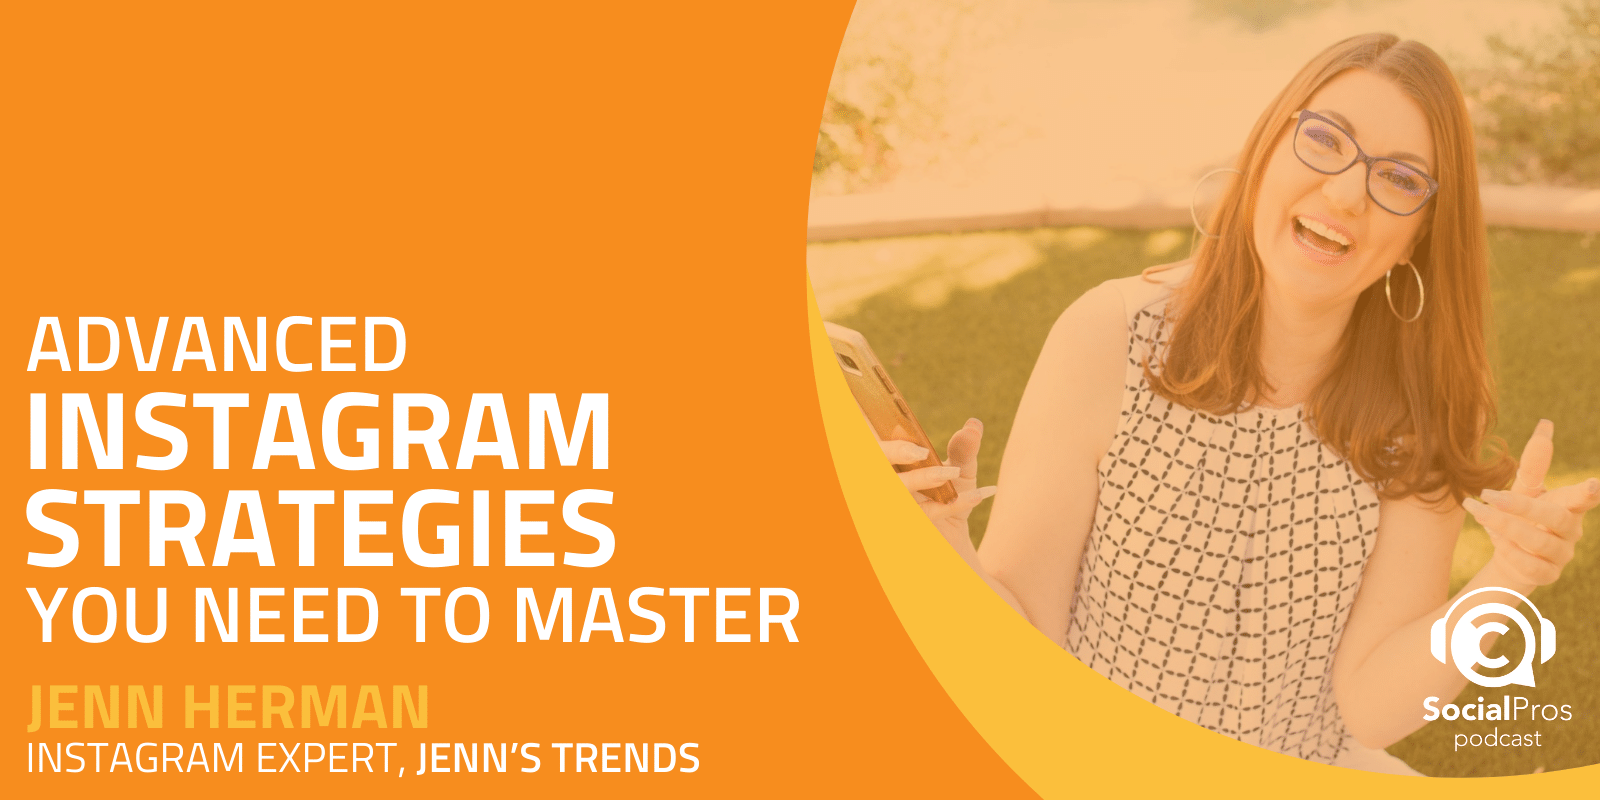 Advanced Instagram Strategies You Need to Master